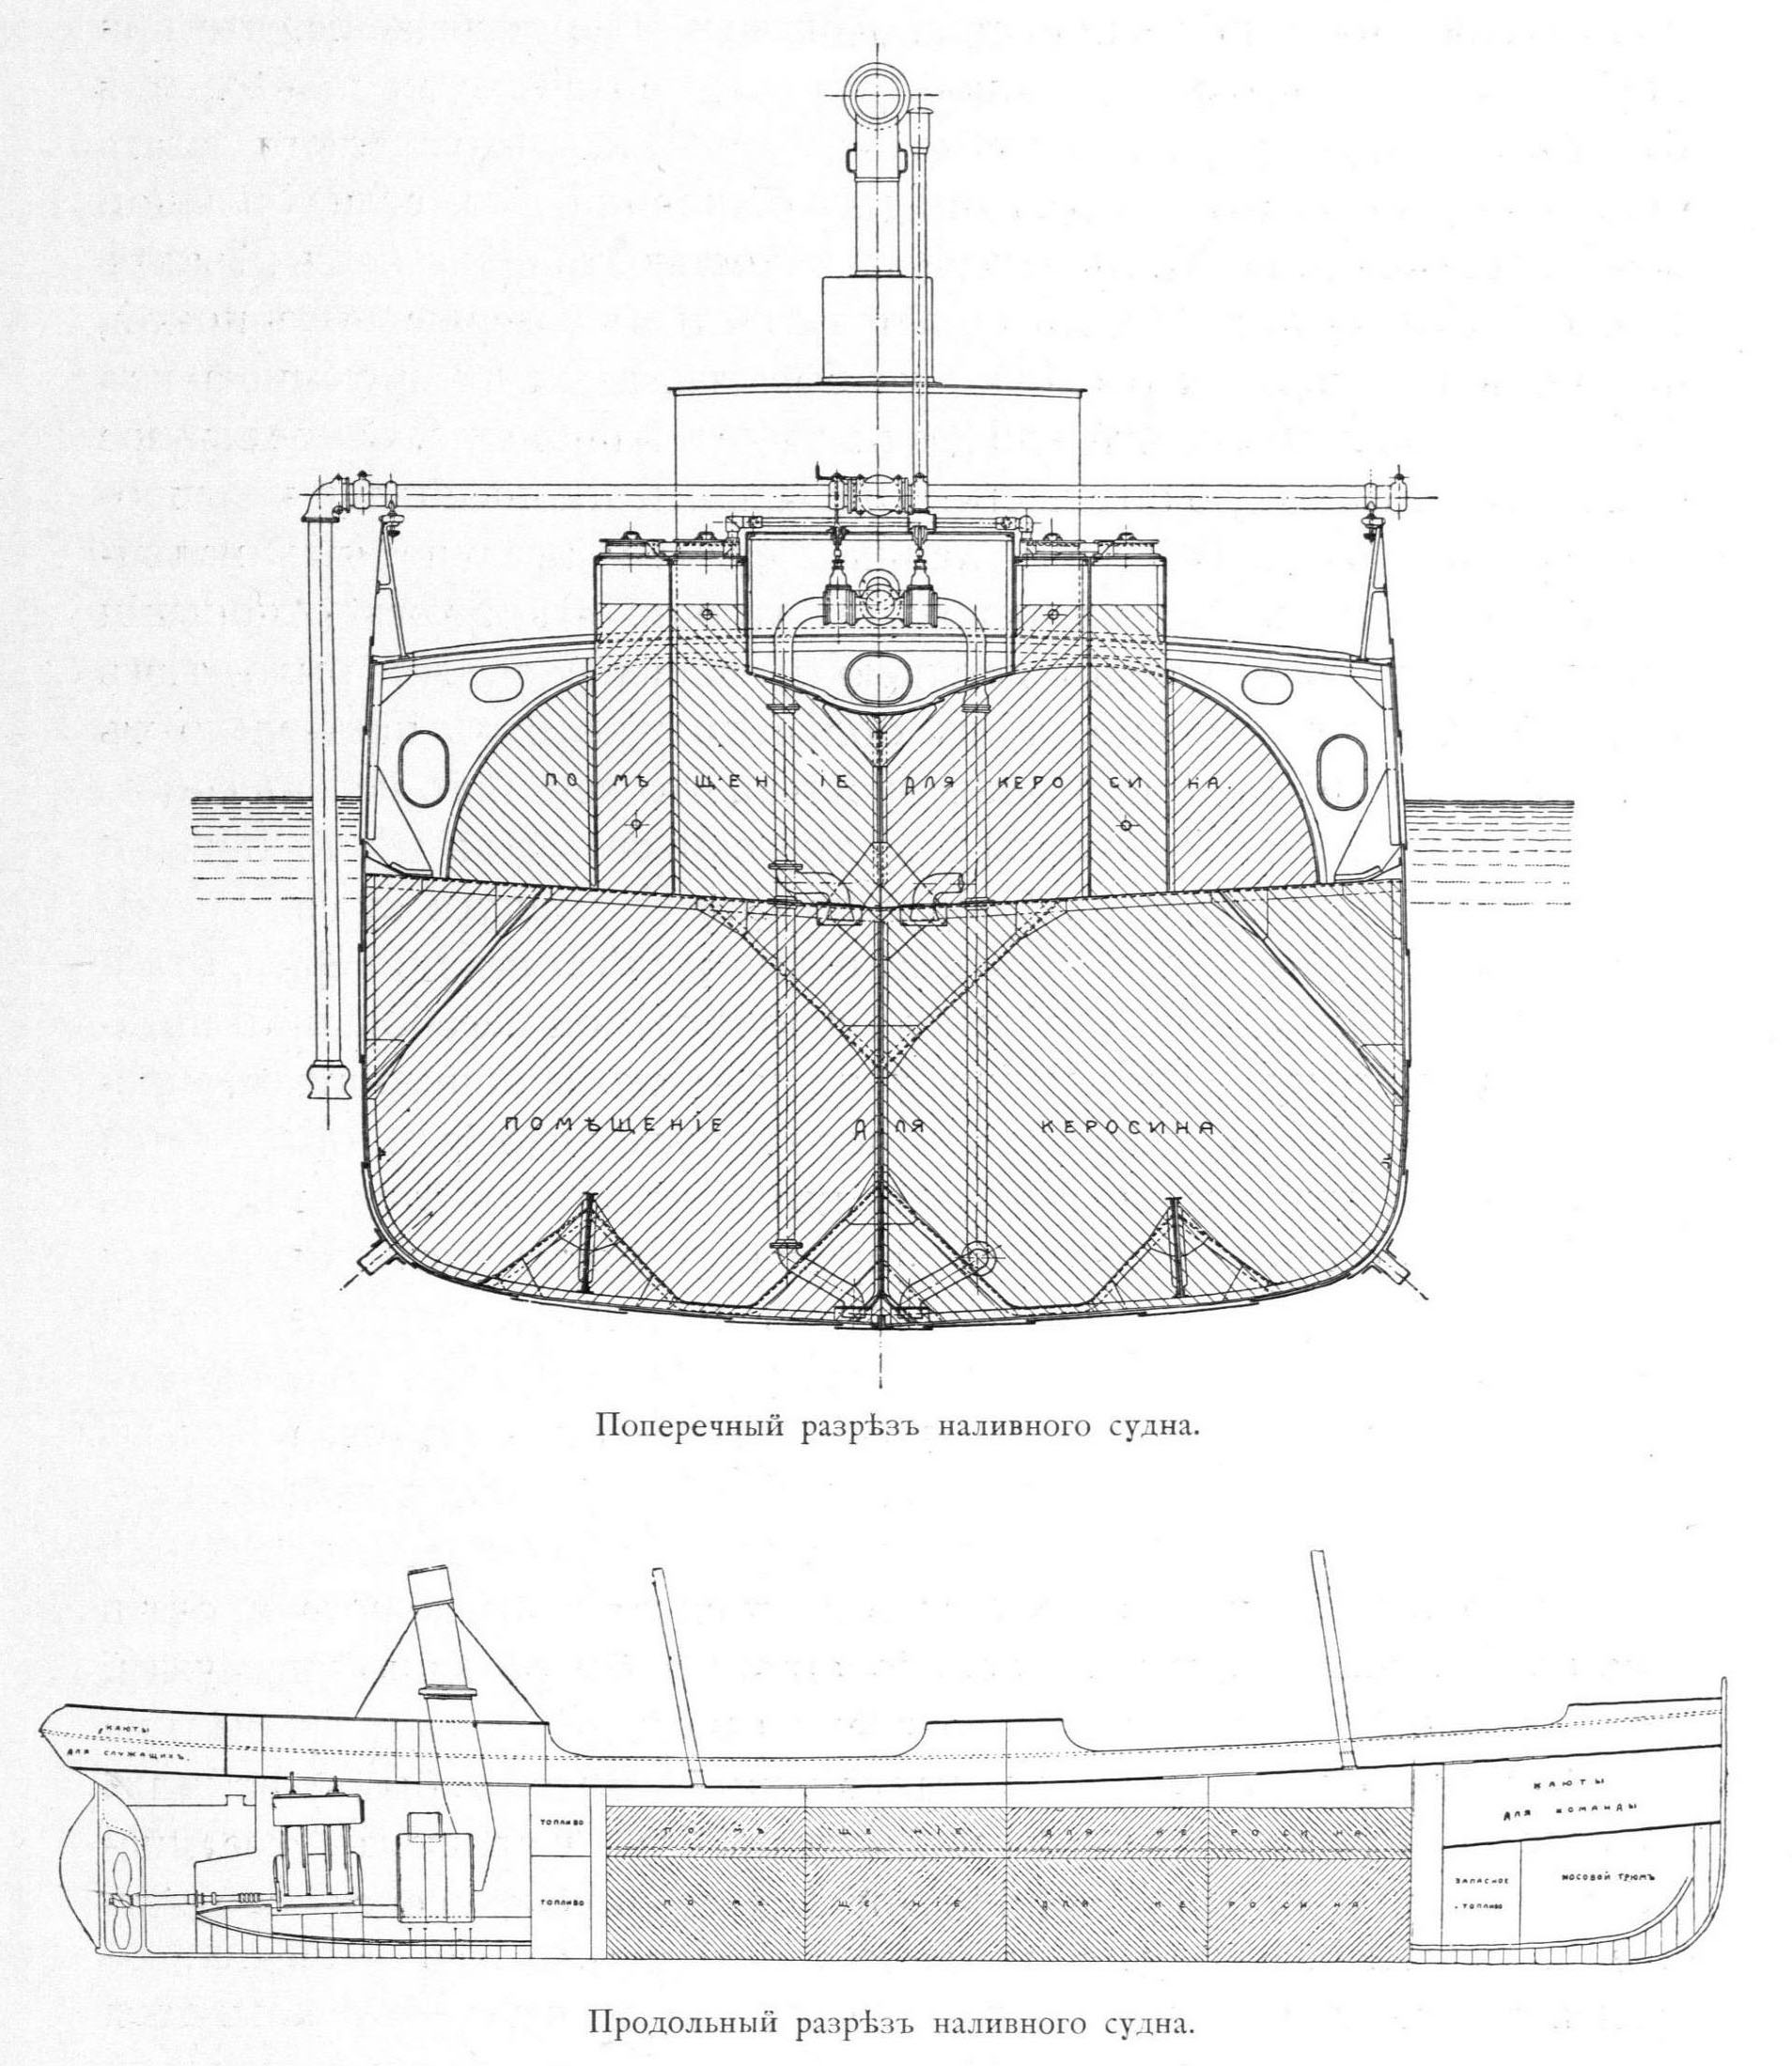 Tanker ships designed and built after Branobels instructions created a basis for the Russian tanker fleet. Here we can see the average drawings of one of the first successful boat models.